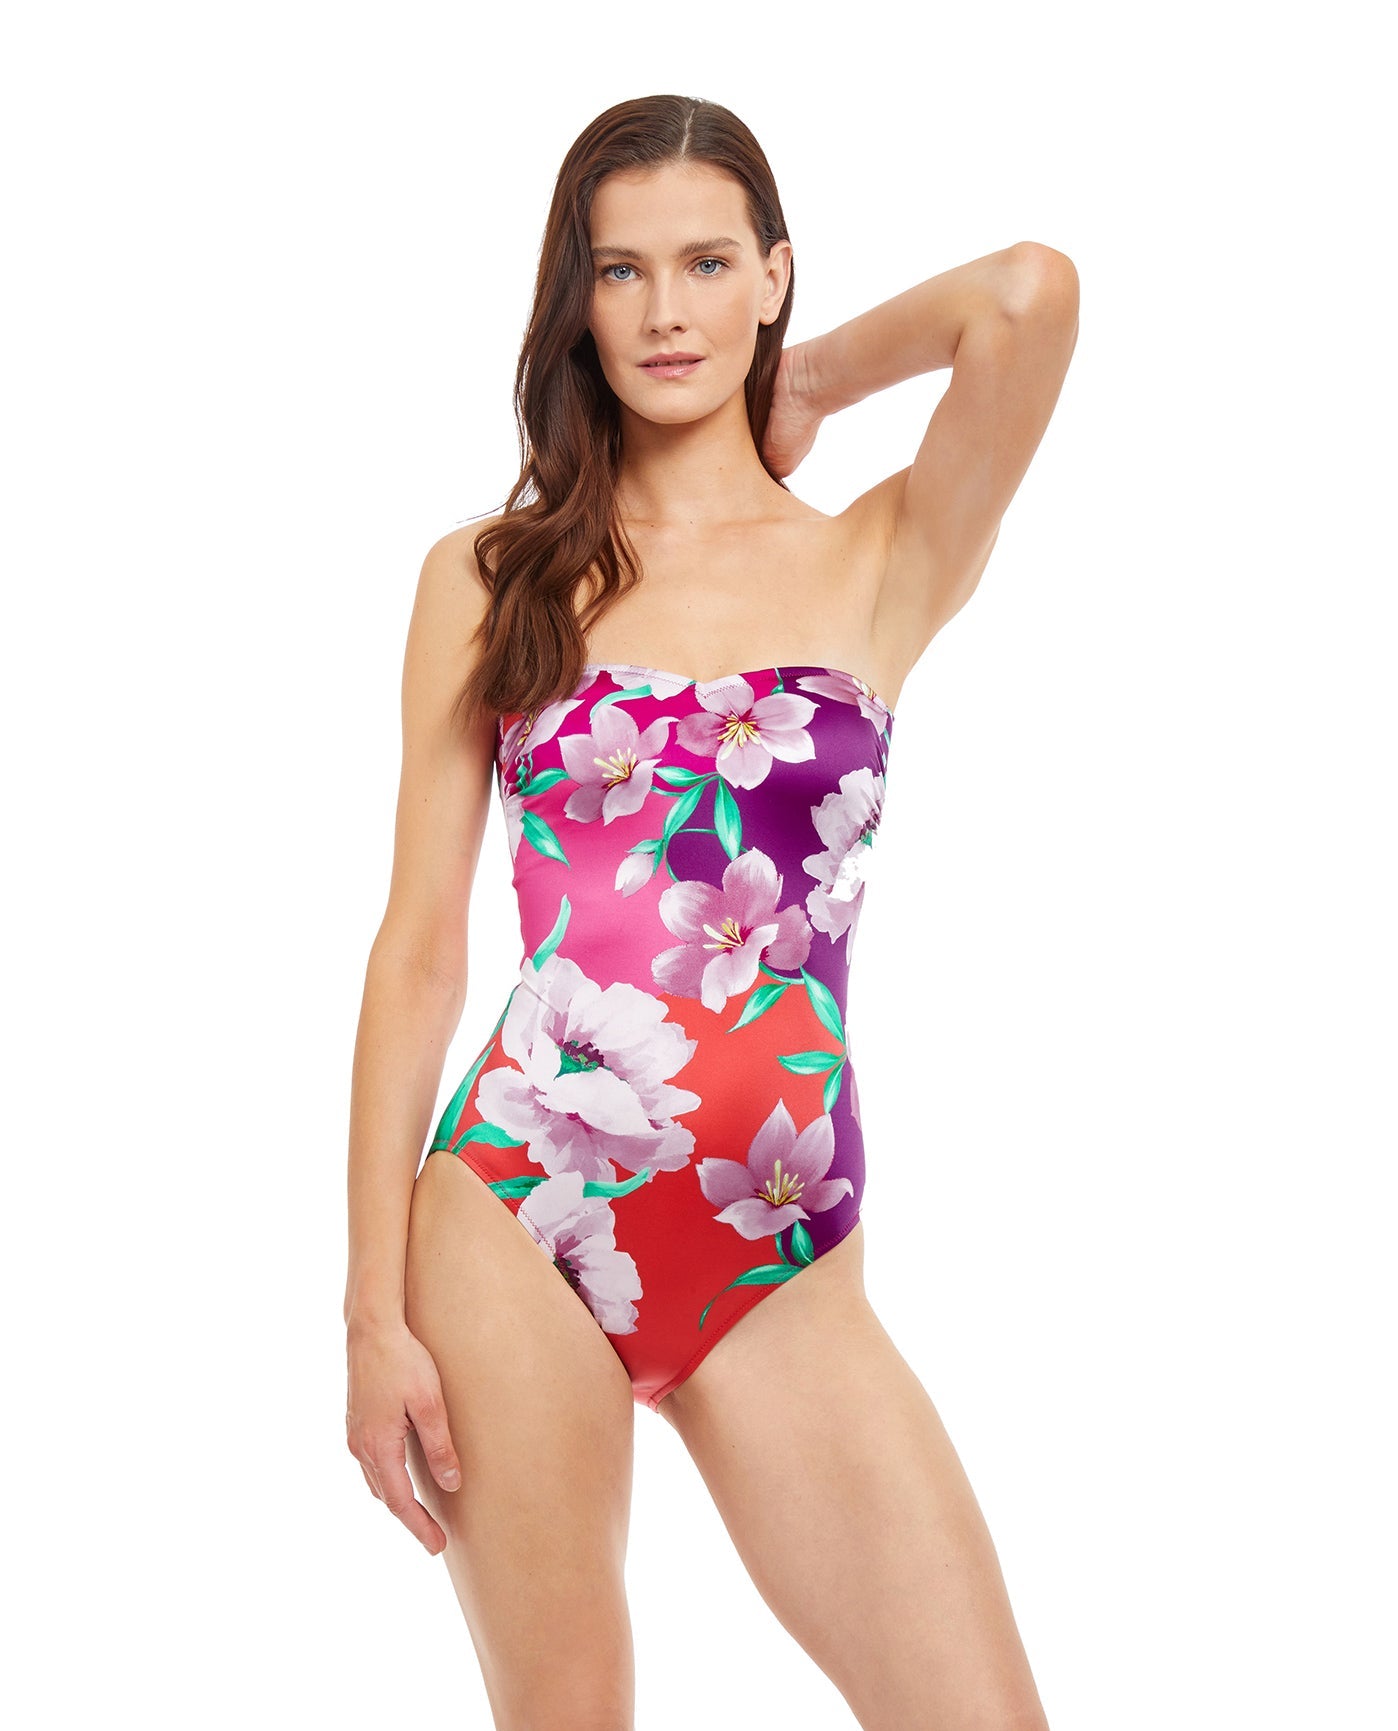 Front View Of Gottex Essentials Bella Rose Shaped Bandeau One Piece Swimsuit | Gottex Bella Rosa Cherry